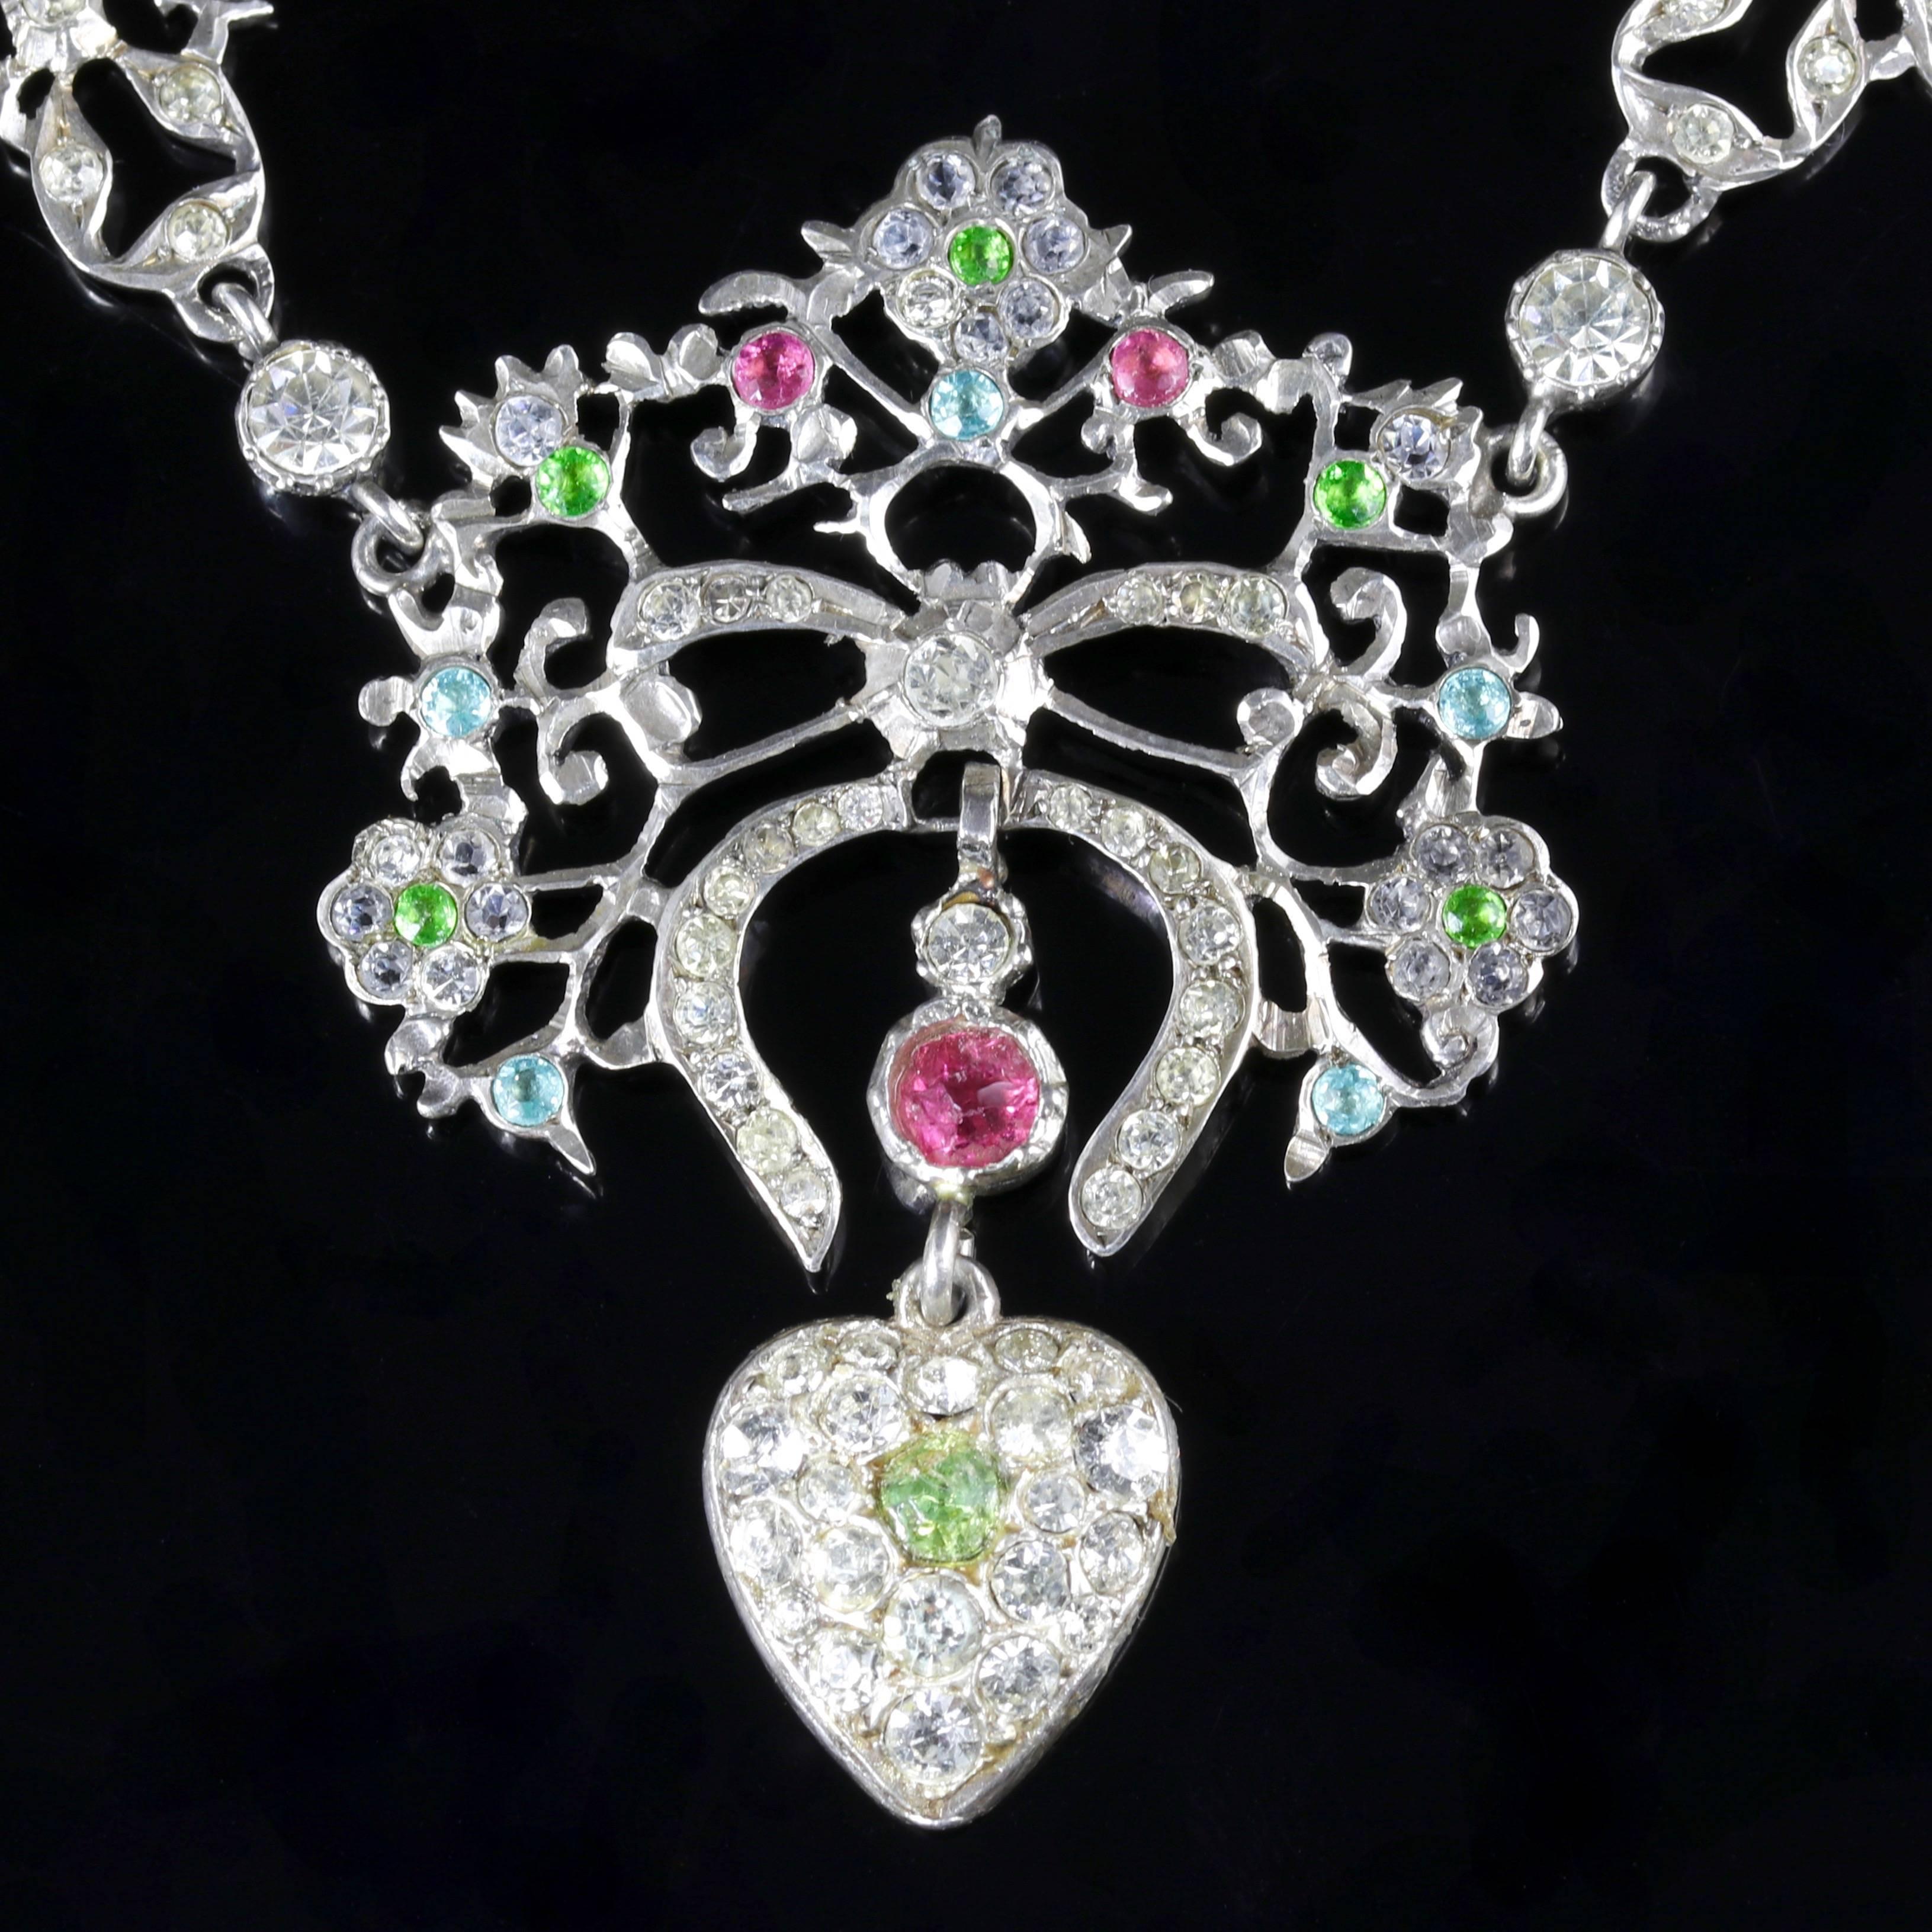 This genuine Victorian Sterling Silver Suffragette necklace is stunning.

Circa 1900.

Set with beautiful old cut Paste Stones that lead to a lovely heart pendant dropper.

Old Cut Paste Stones sparkle just like Diamonds, captivating the allure of